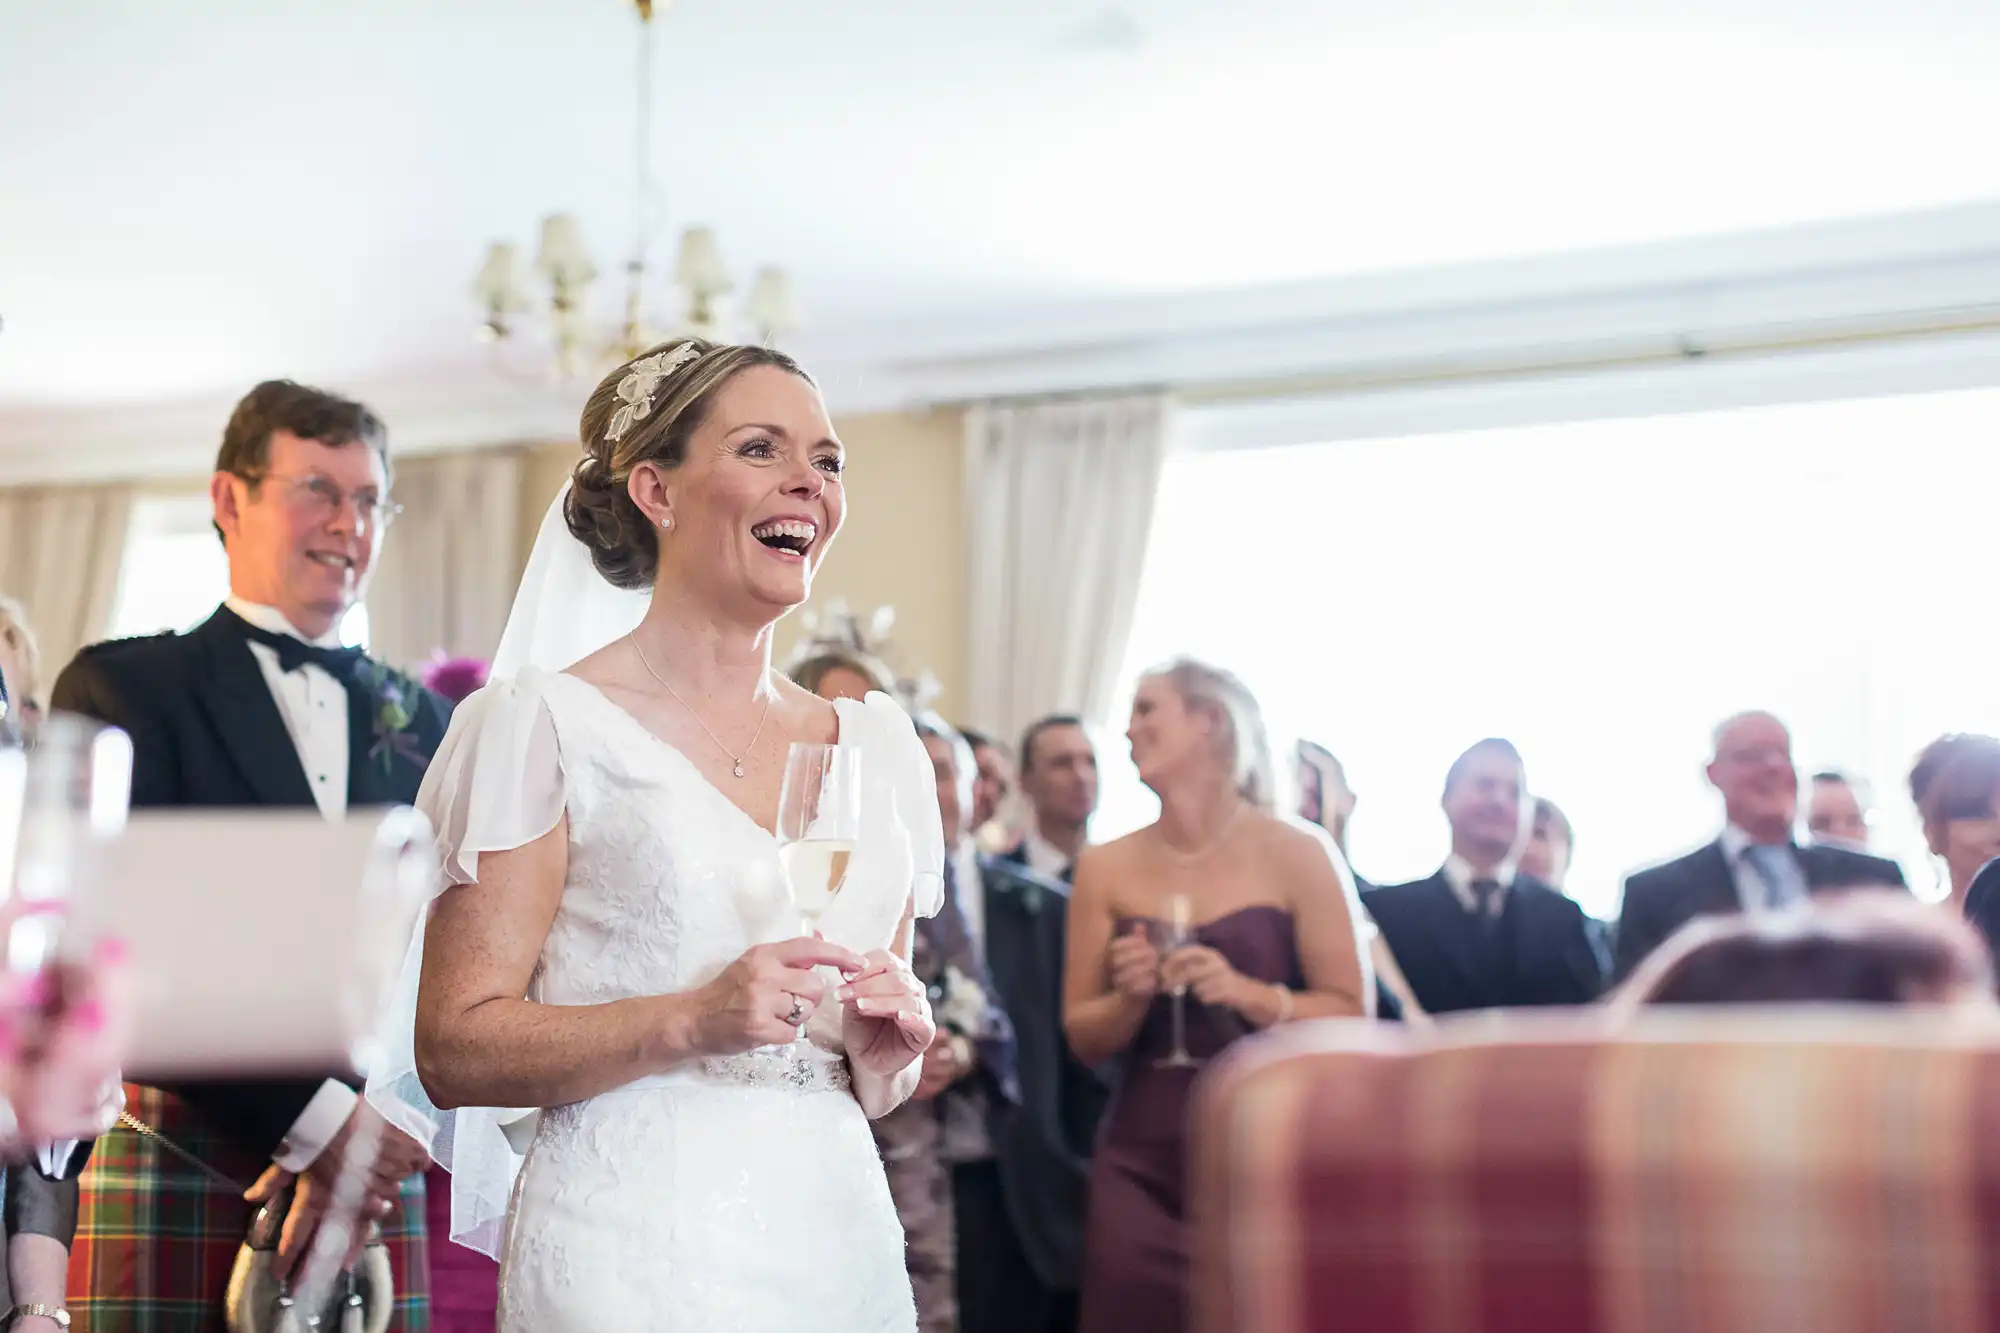 A bride in a white dress smiling joyfully while holding a champagne glass, with guests and a man in a kilt in the background at a wedding reception.